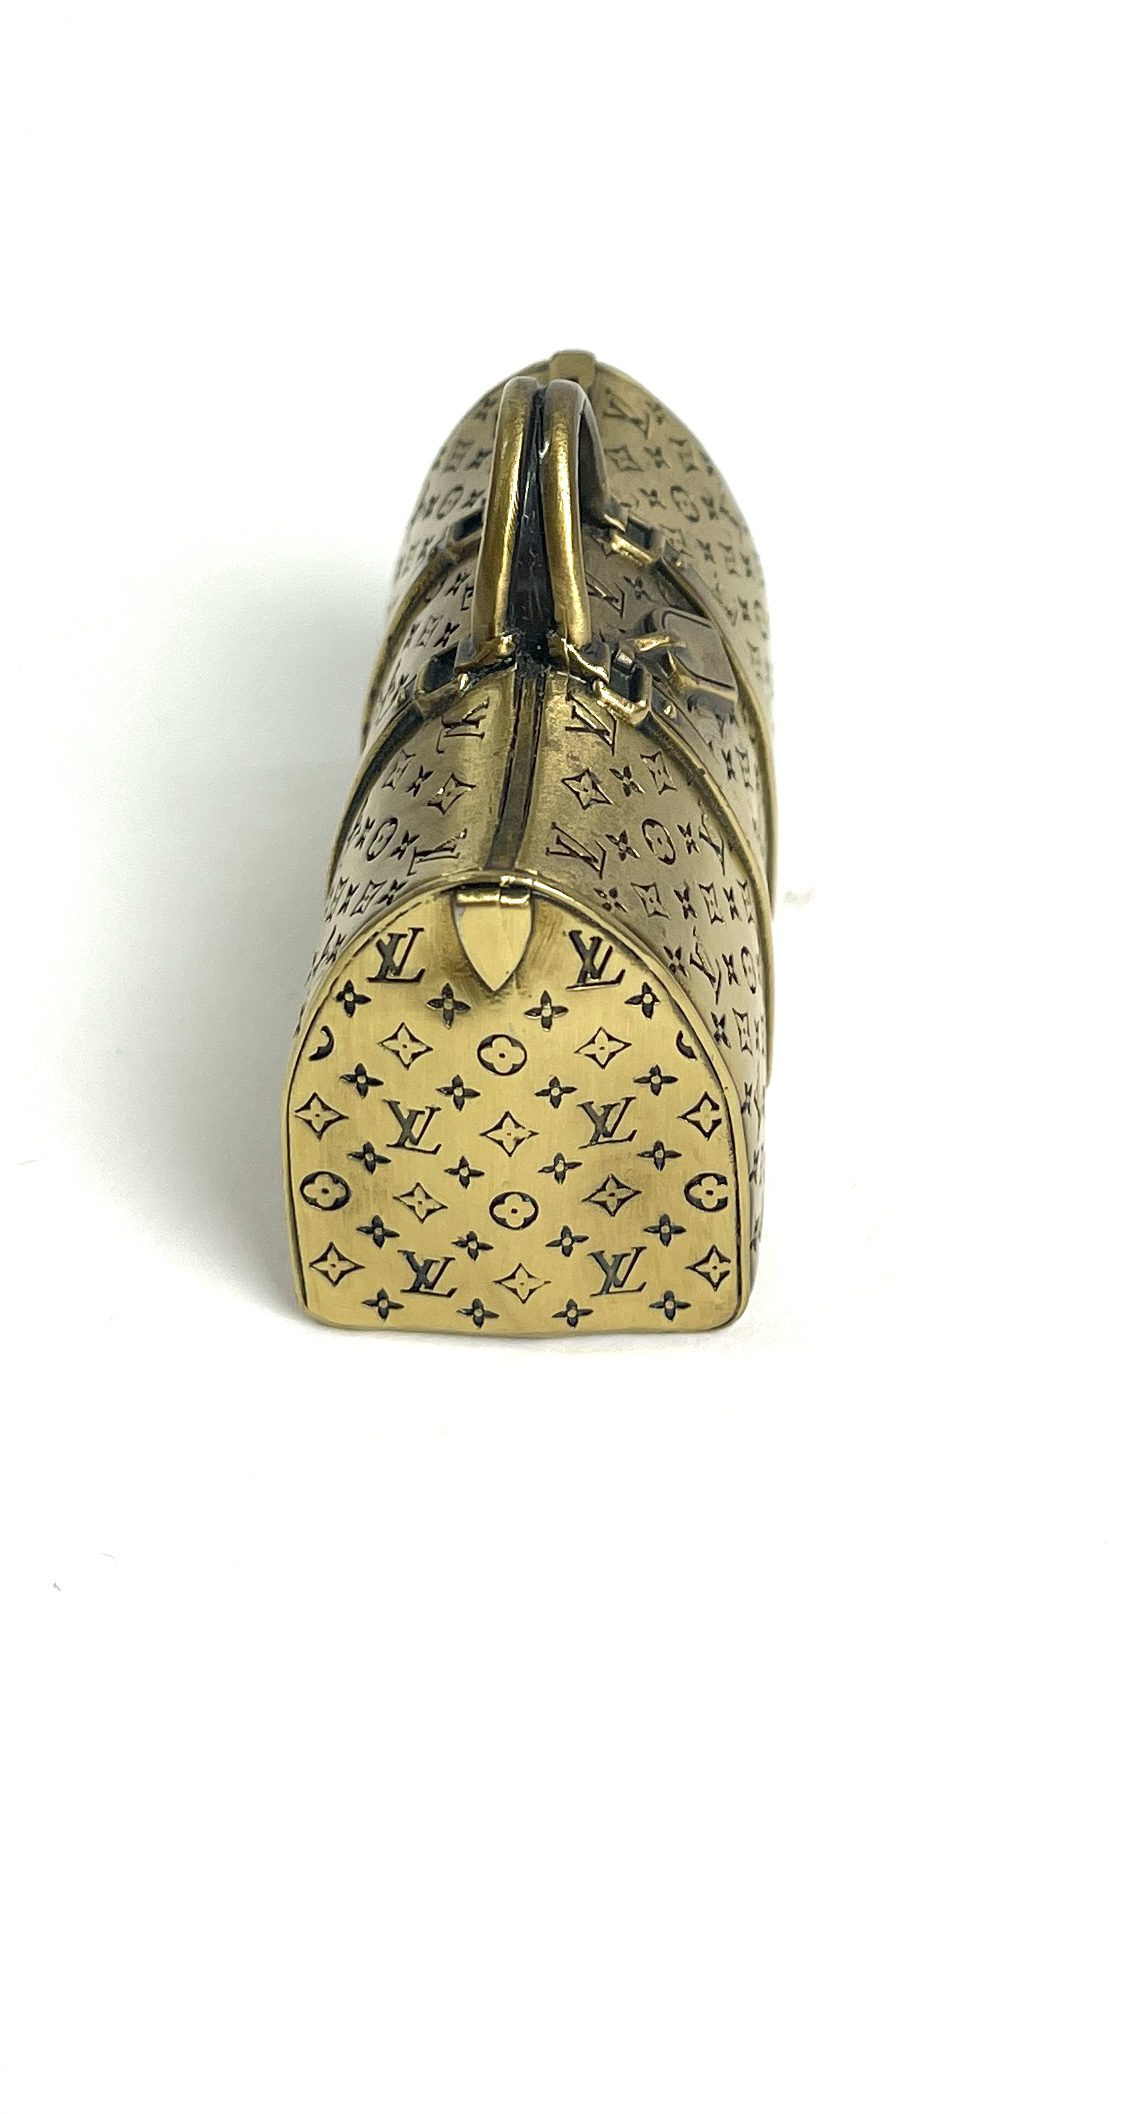 LOUIS VUITTON Keepall Type Paper Weight Metal VIP Only Gold Tone